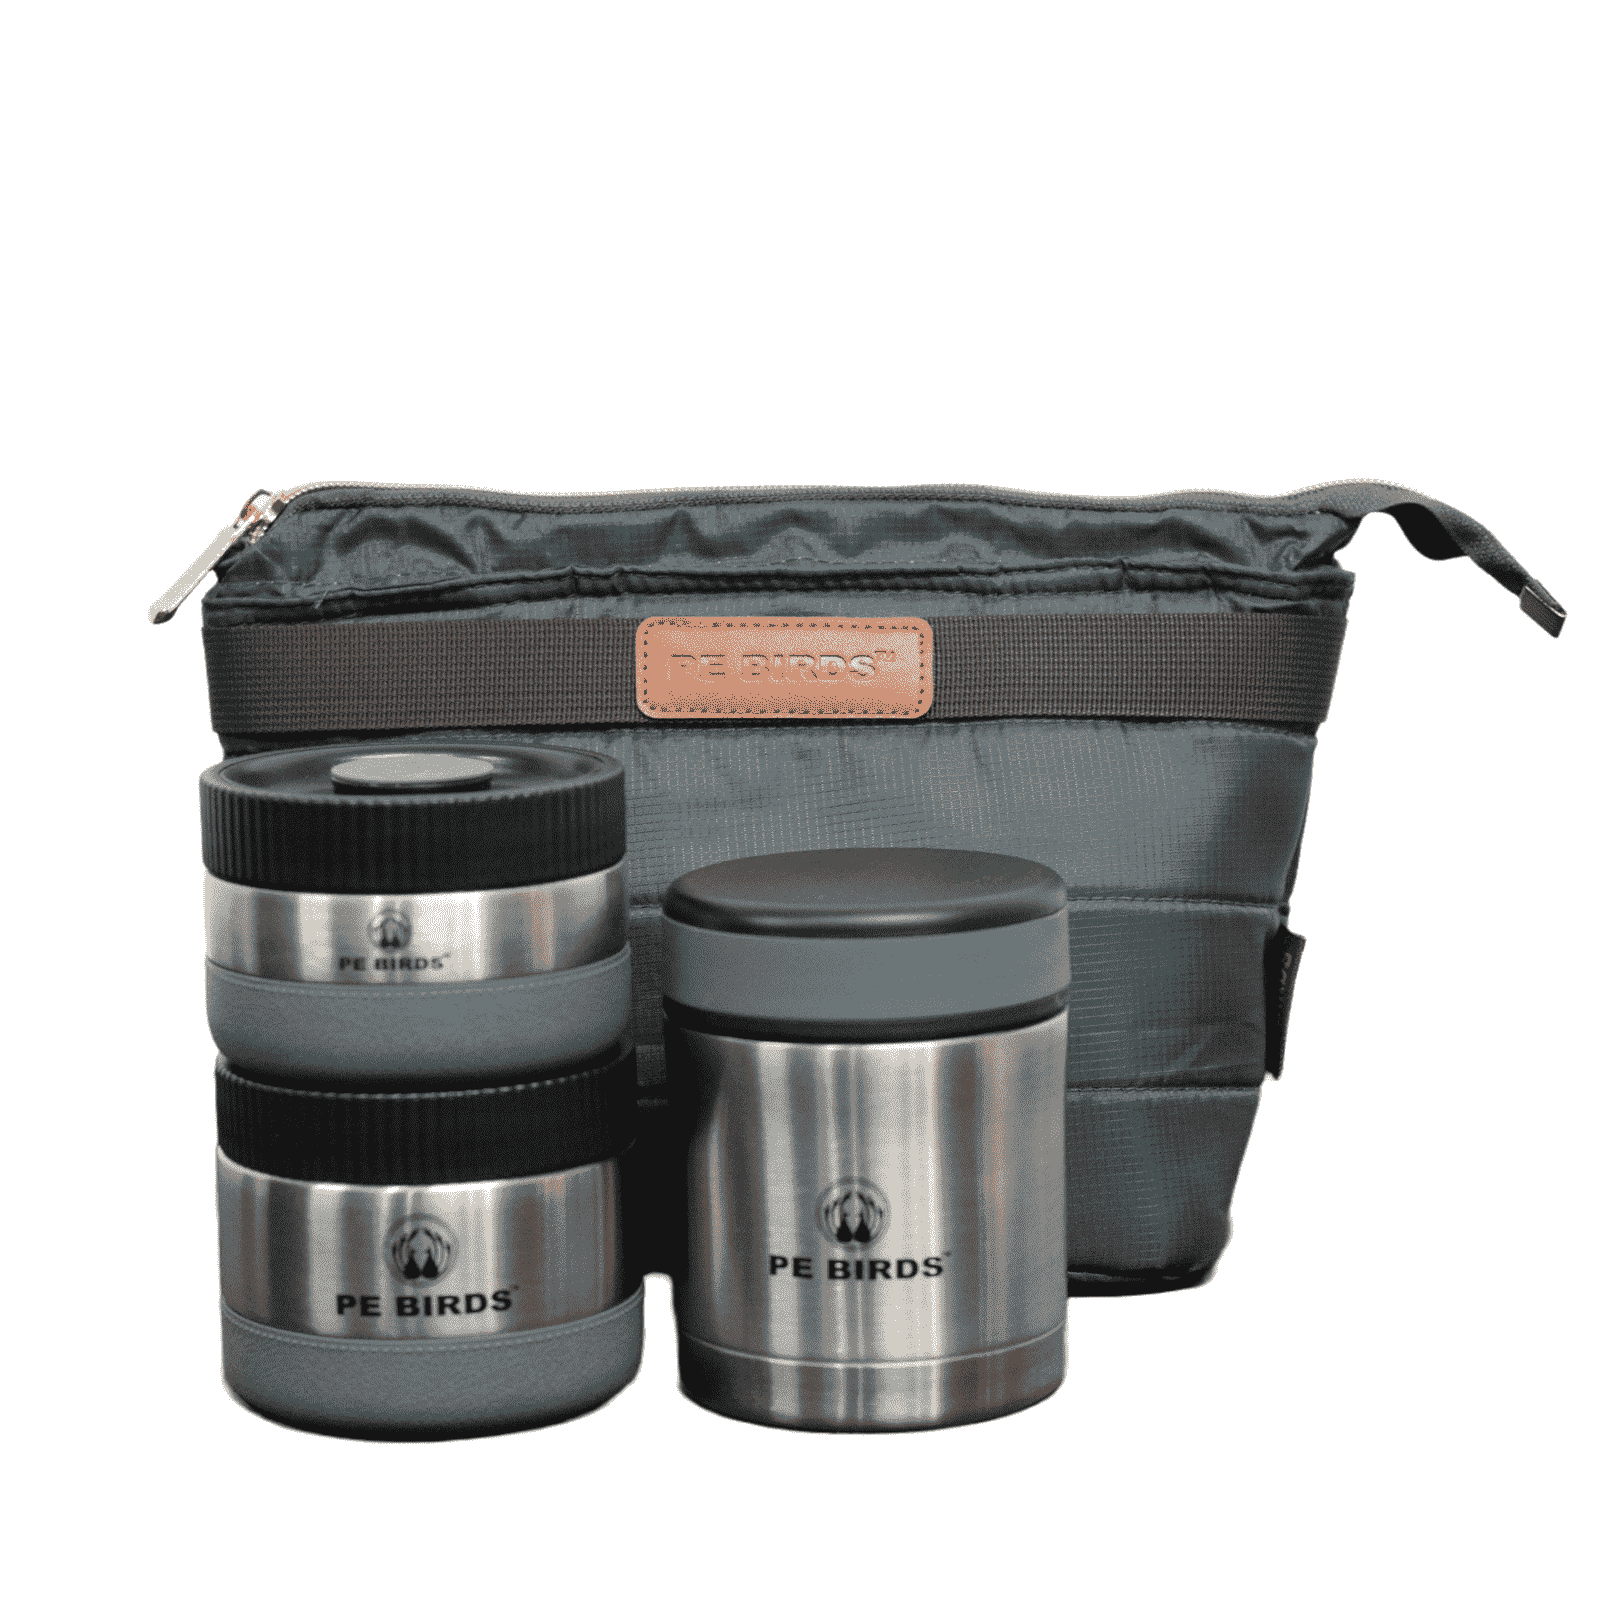 PeBirds Sambar Jar Nutri kit Lunch boxes | 350ml food Jar retains HOT & Cold, 300 & 400ml Steel containers ( Don't keep HOT )